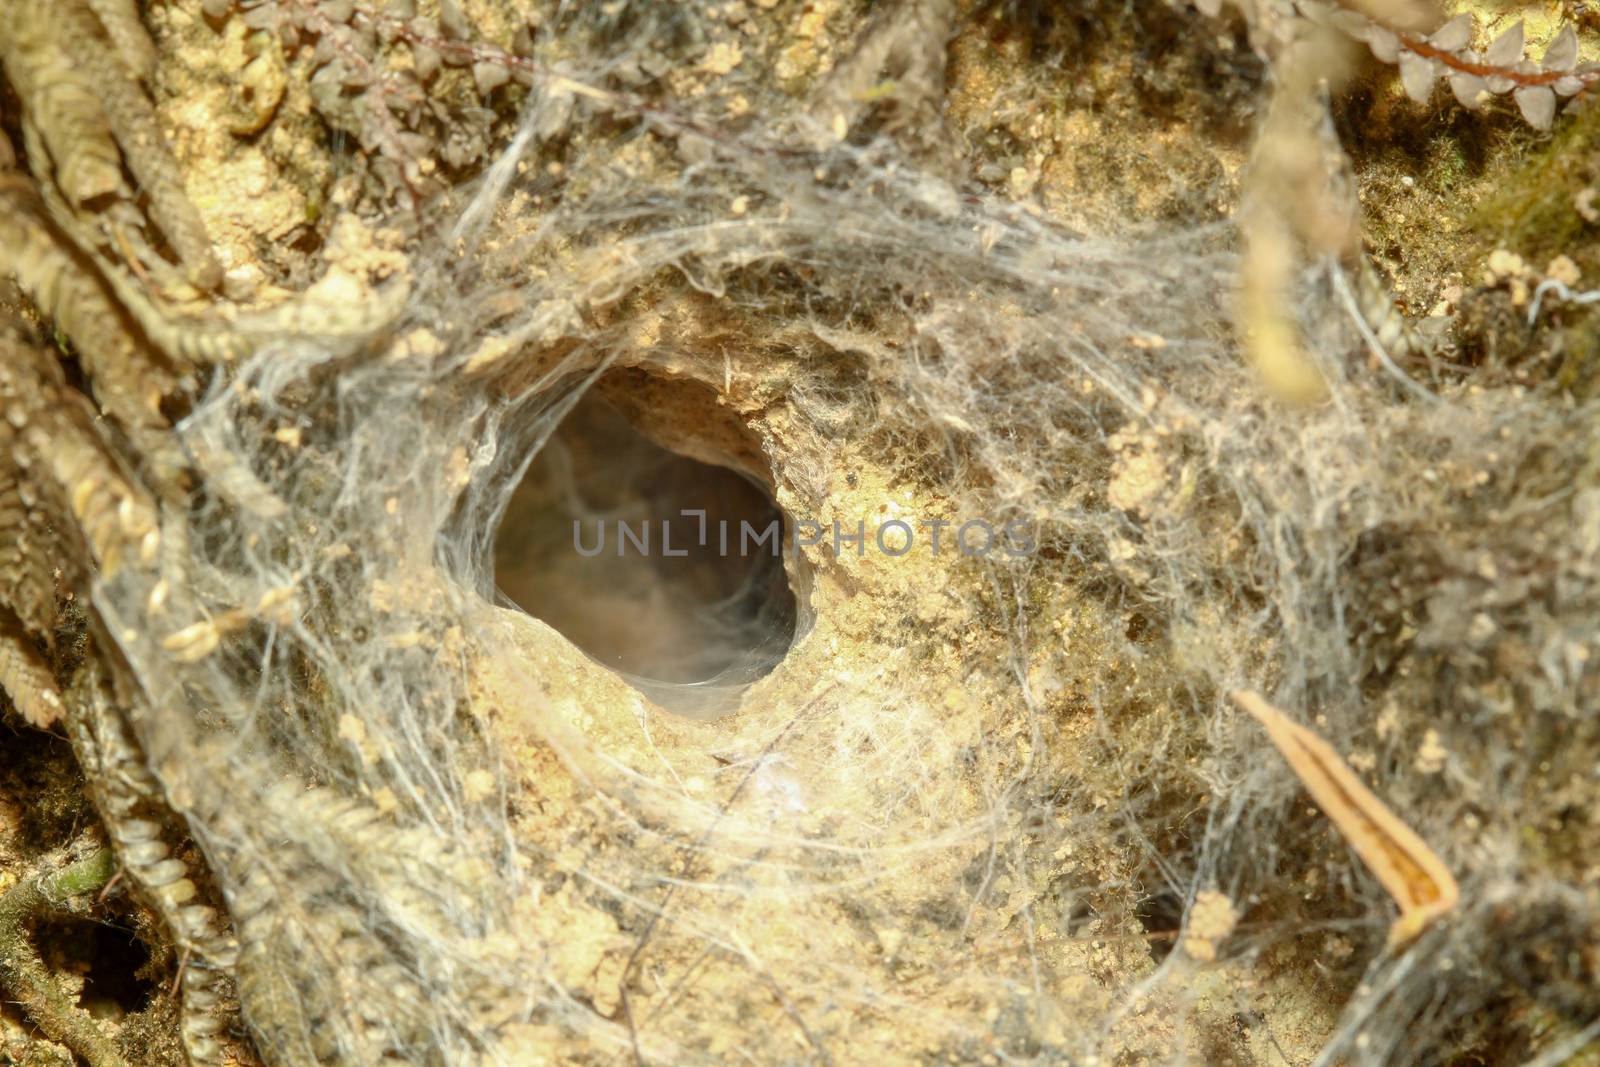 spider hole in soil at forest